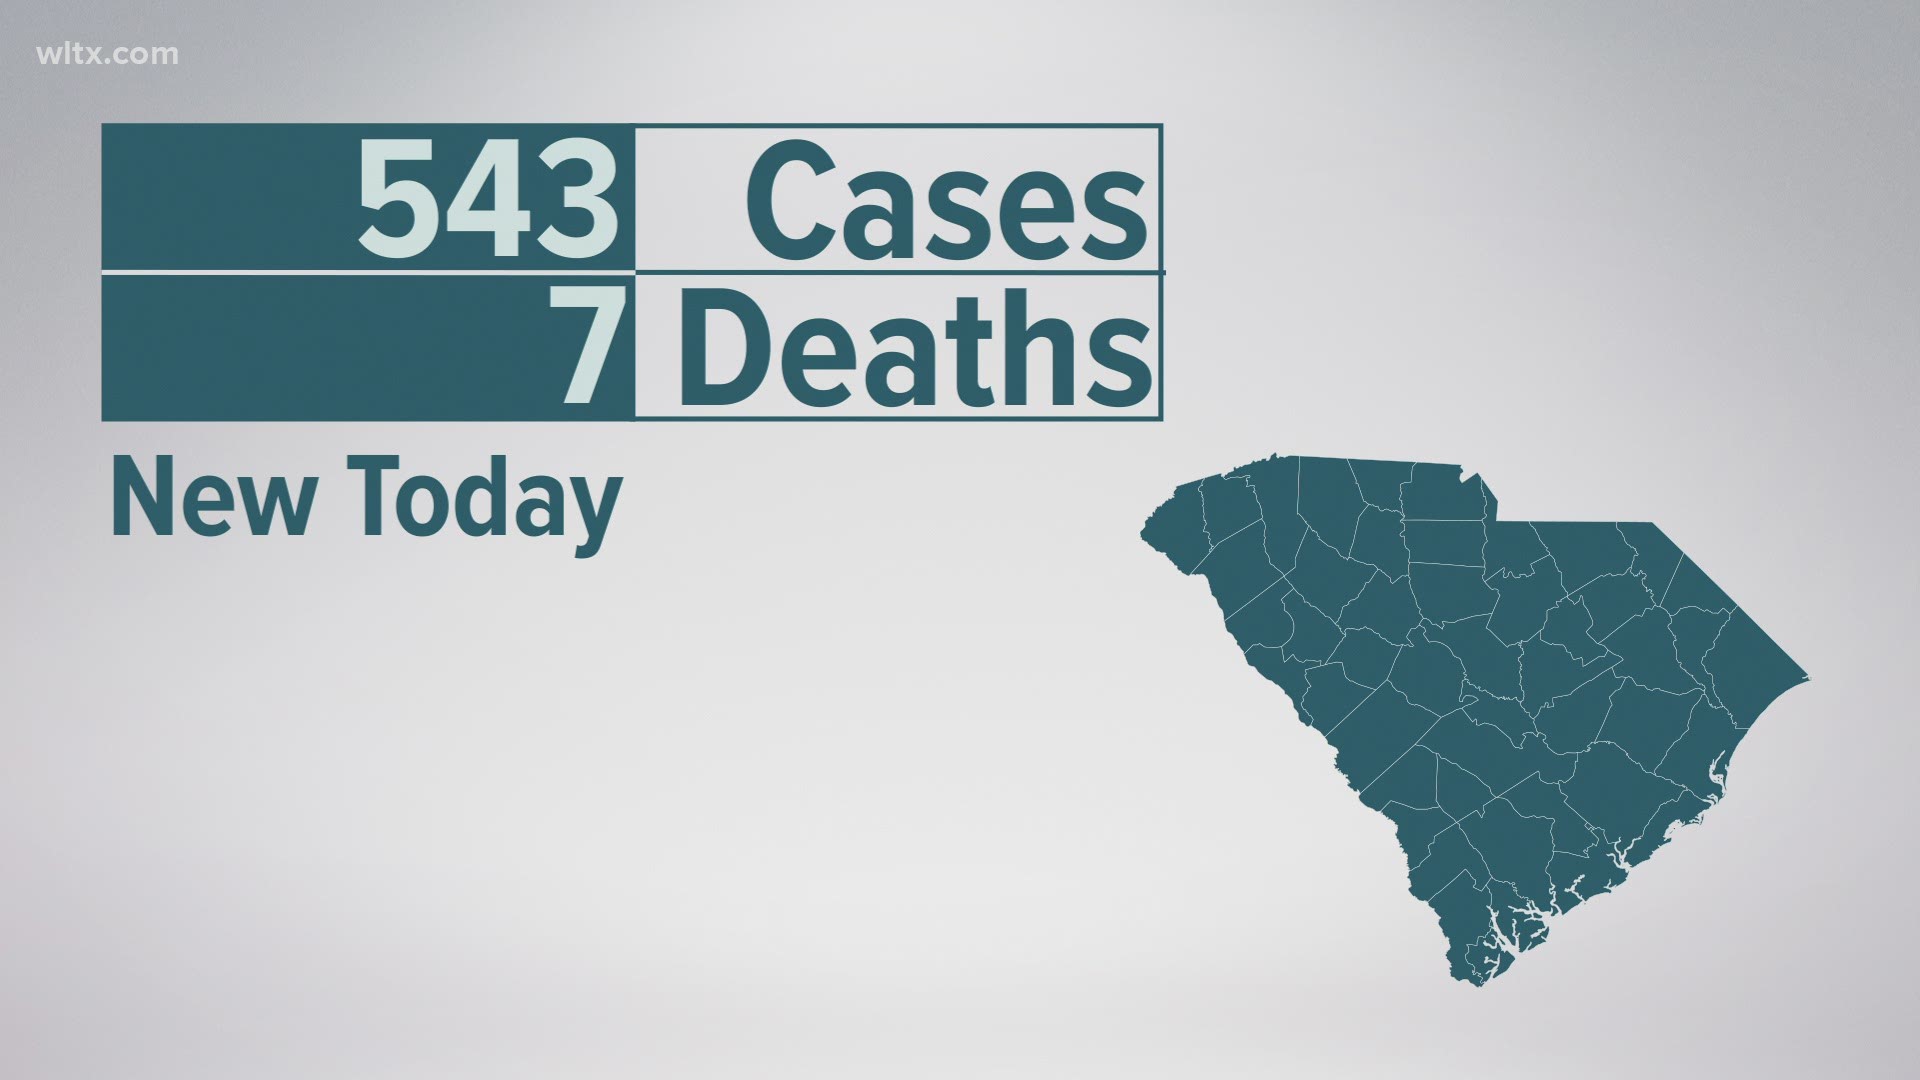 This brings the total number of confirmed cases to 111,202, probable cases to 1,349, confirmed deaths to 2,387, and 124 probable deaths